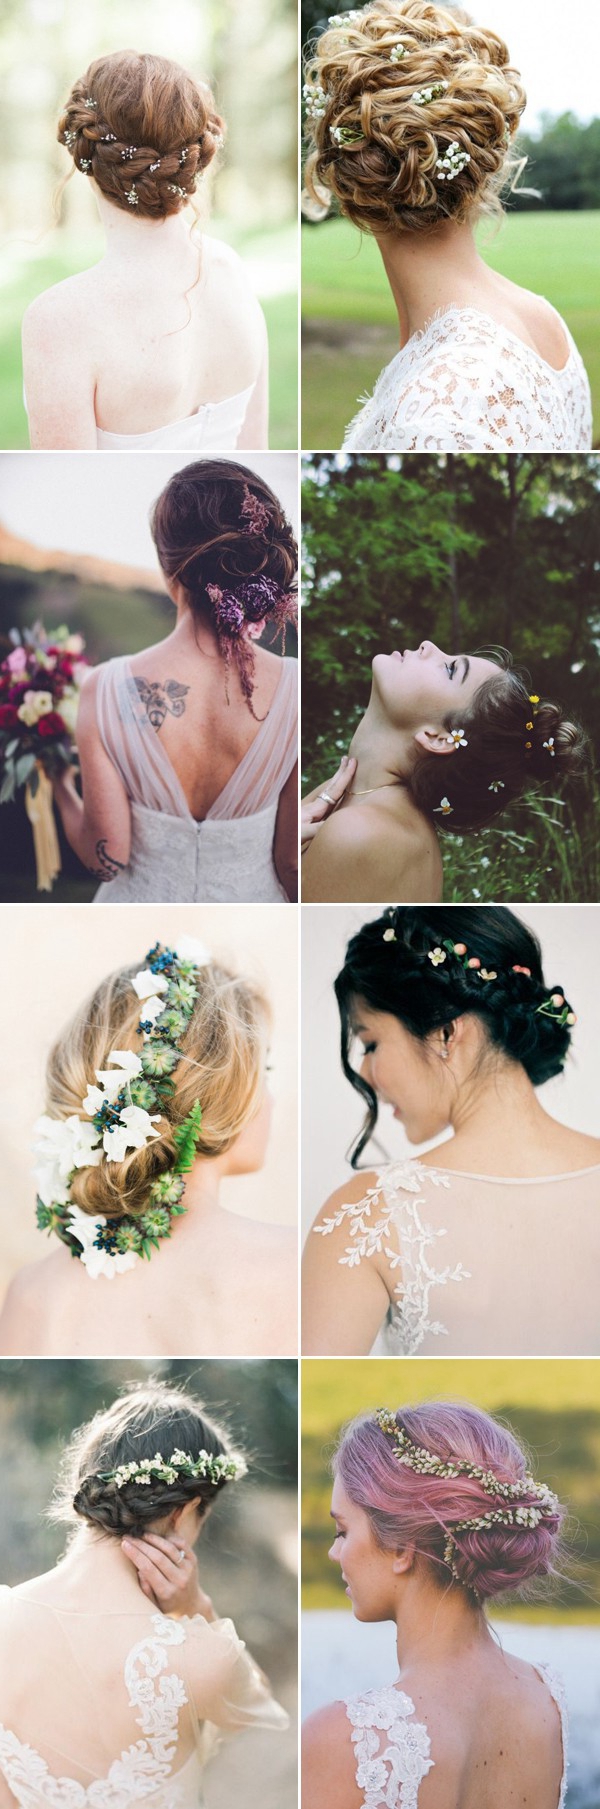 wedding-updos-with-flowers